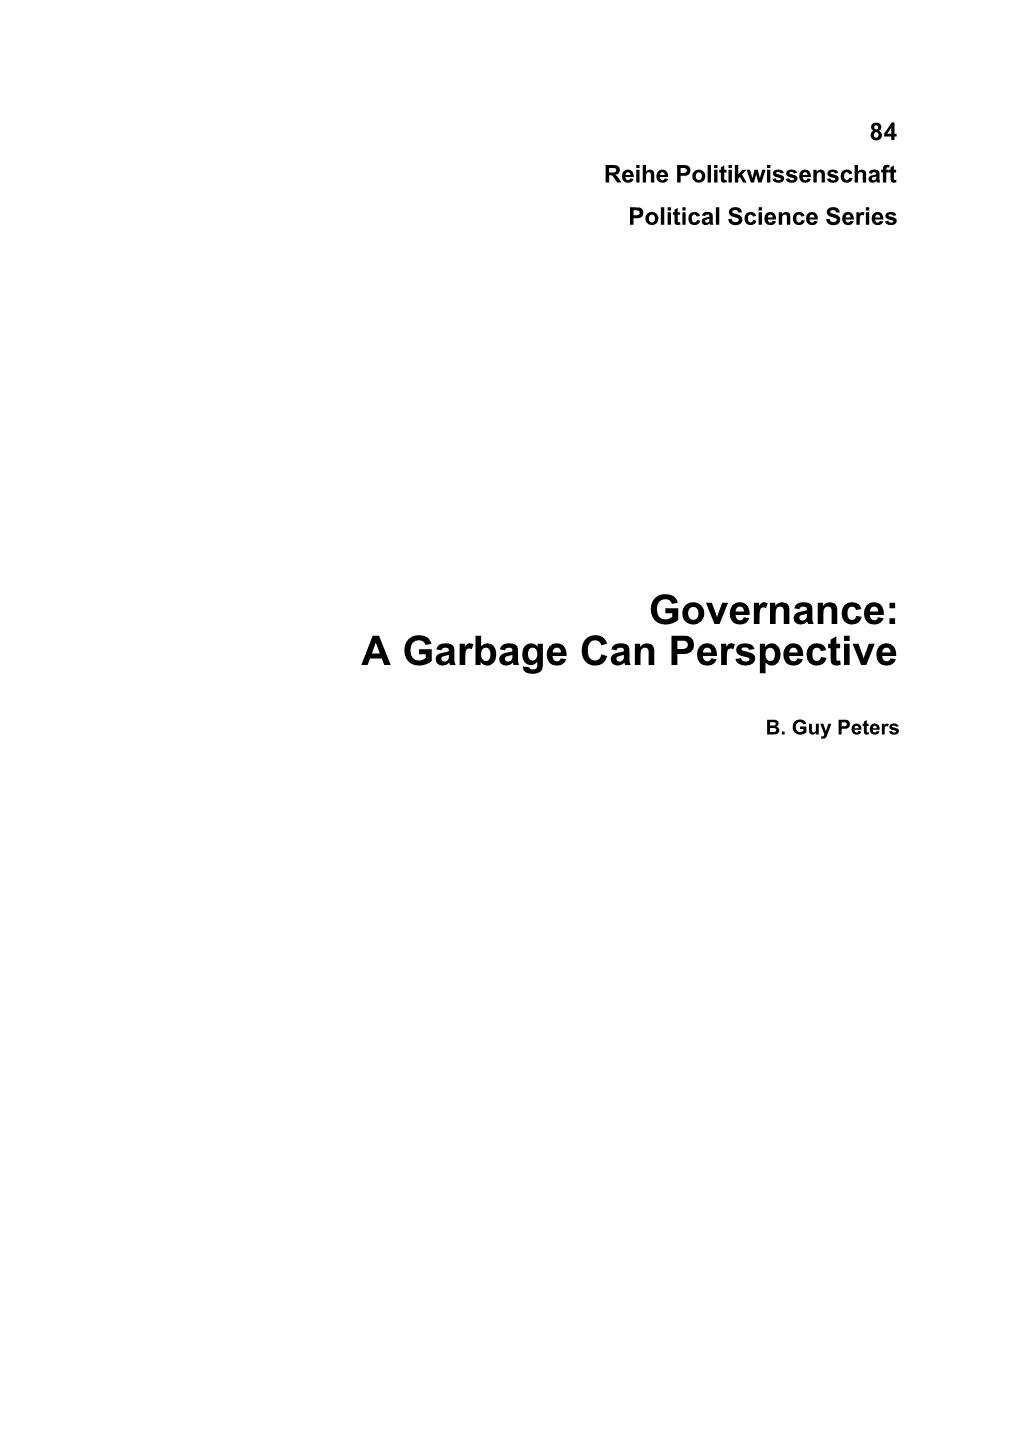 Governance: a Garbage Can Perspective